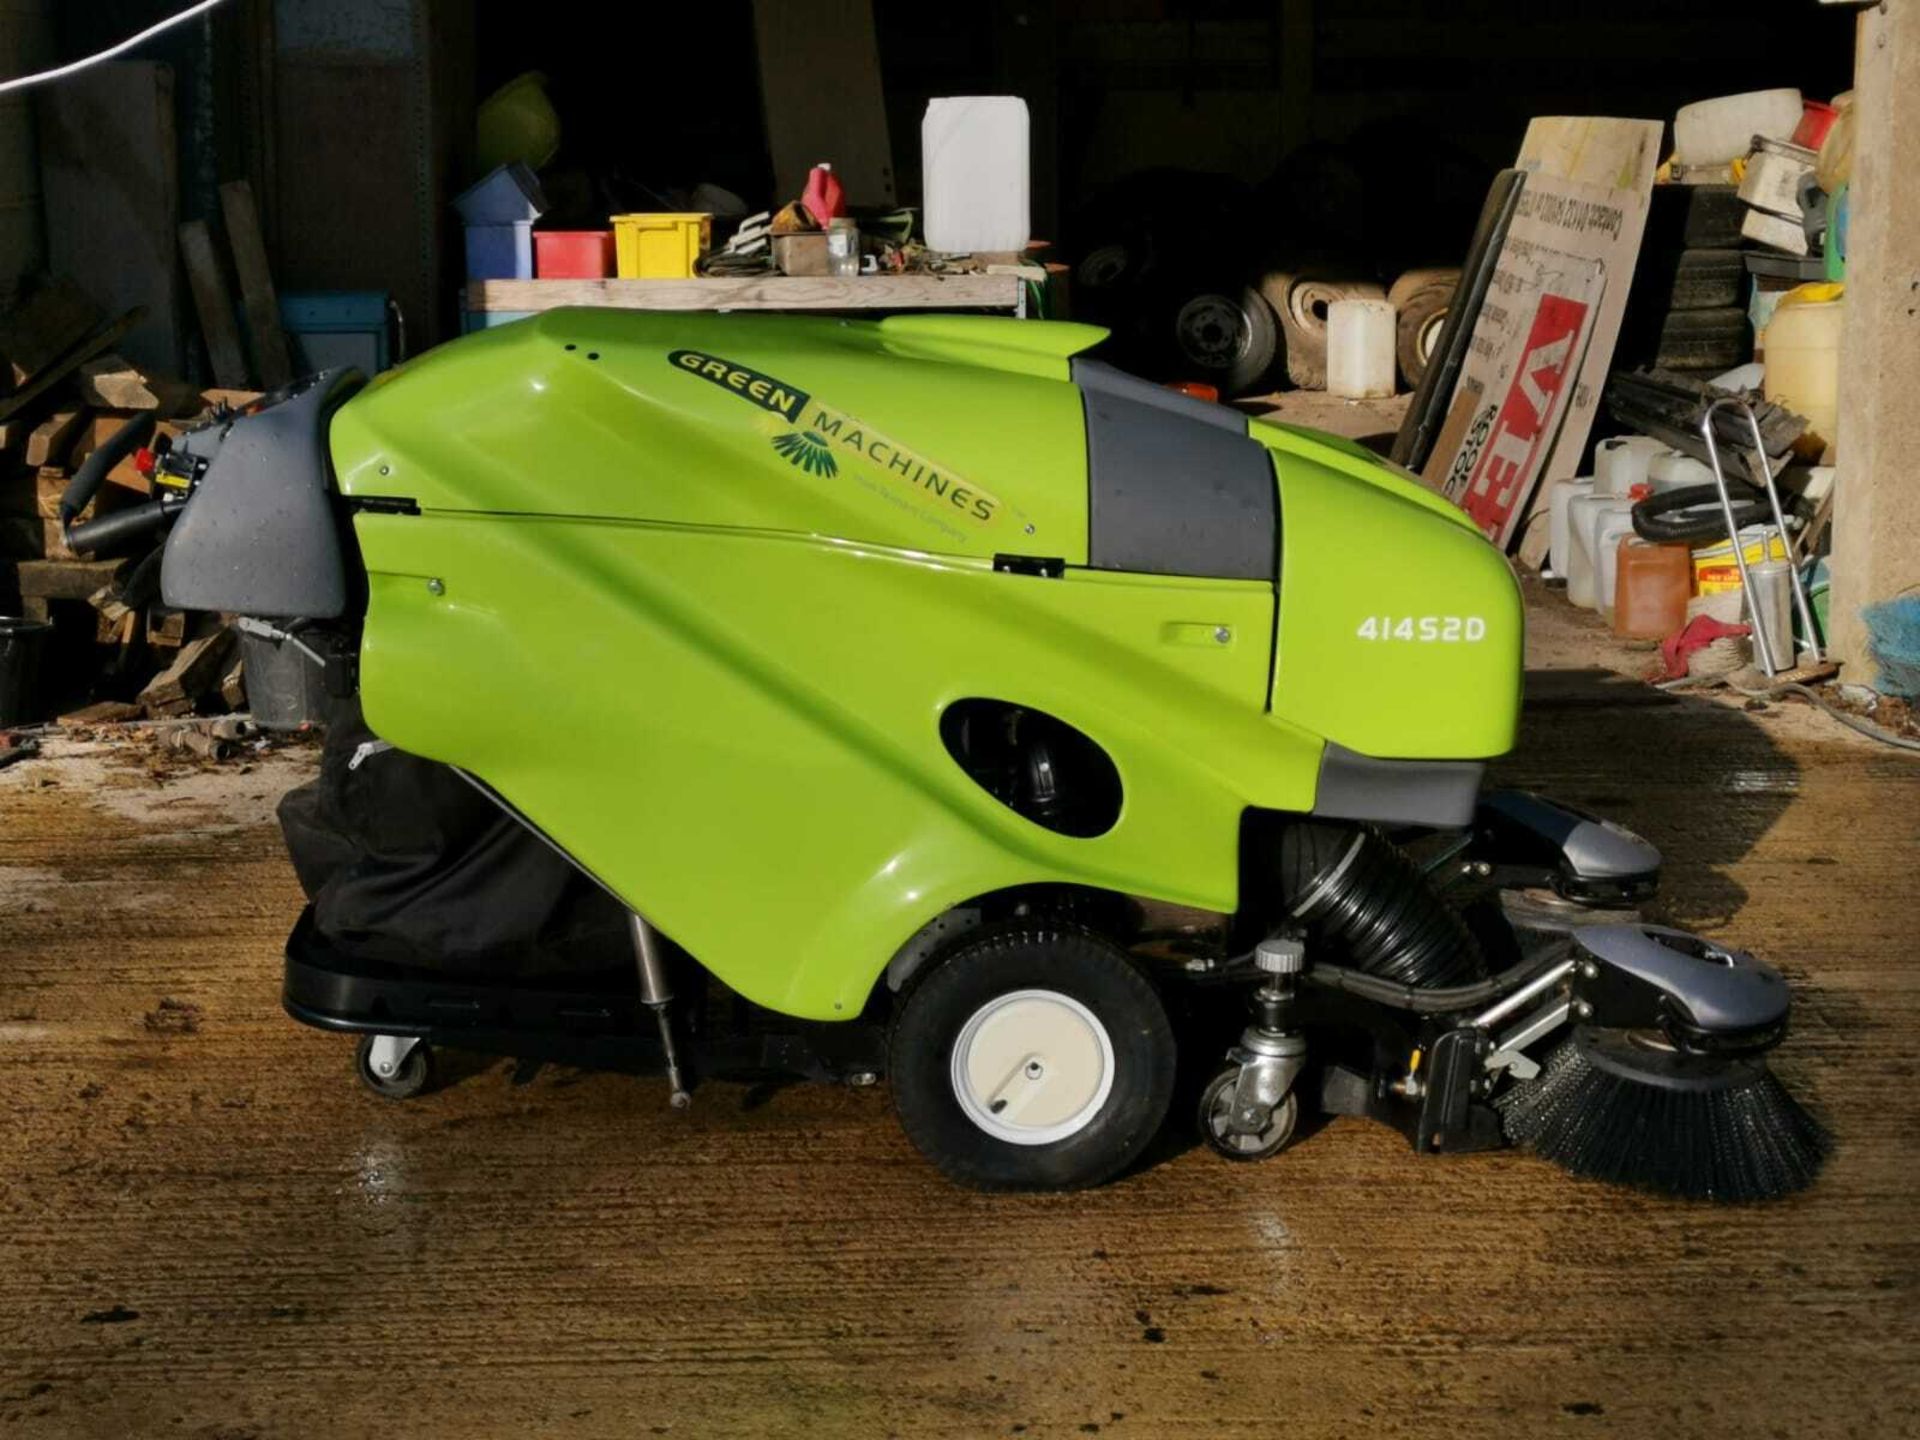 TENNANT GREEN MACHINE MODEL: 414S2D PEDESTRIAN SWEEPER, ONLY 243 HOURS, YEAR 11/2013 *PLUS VAT* - Image 8 of 11